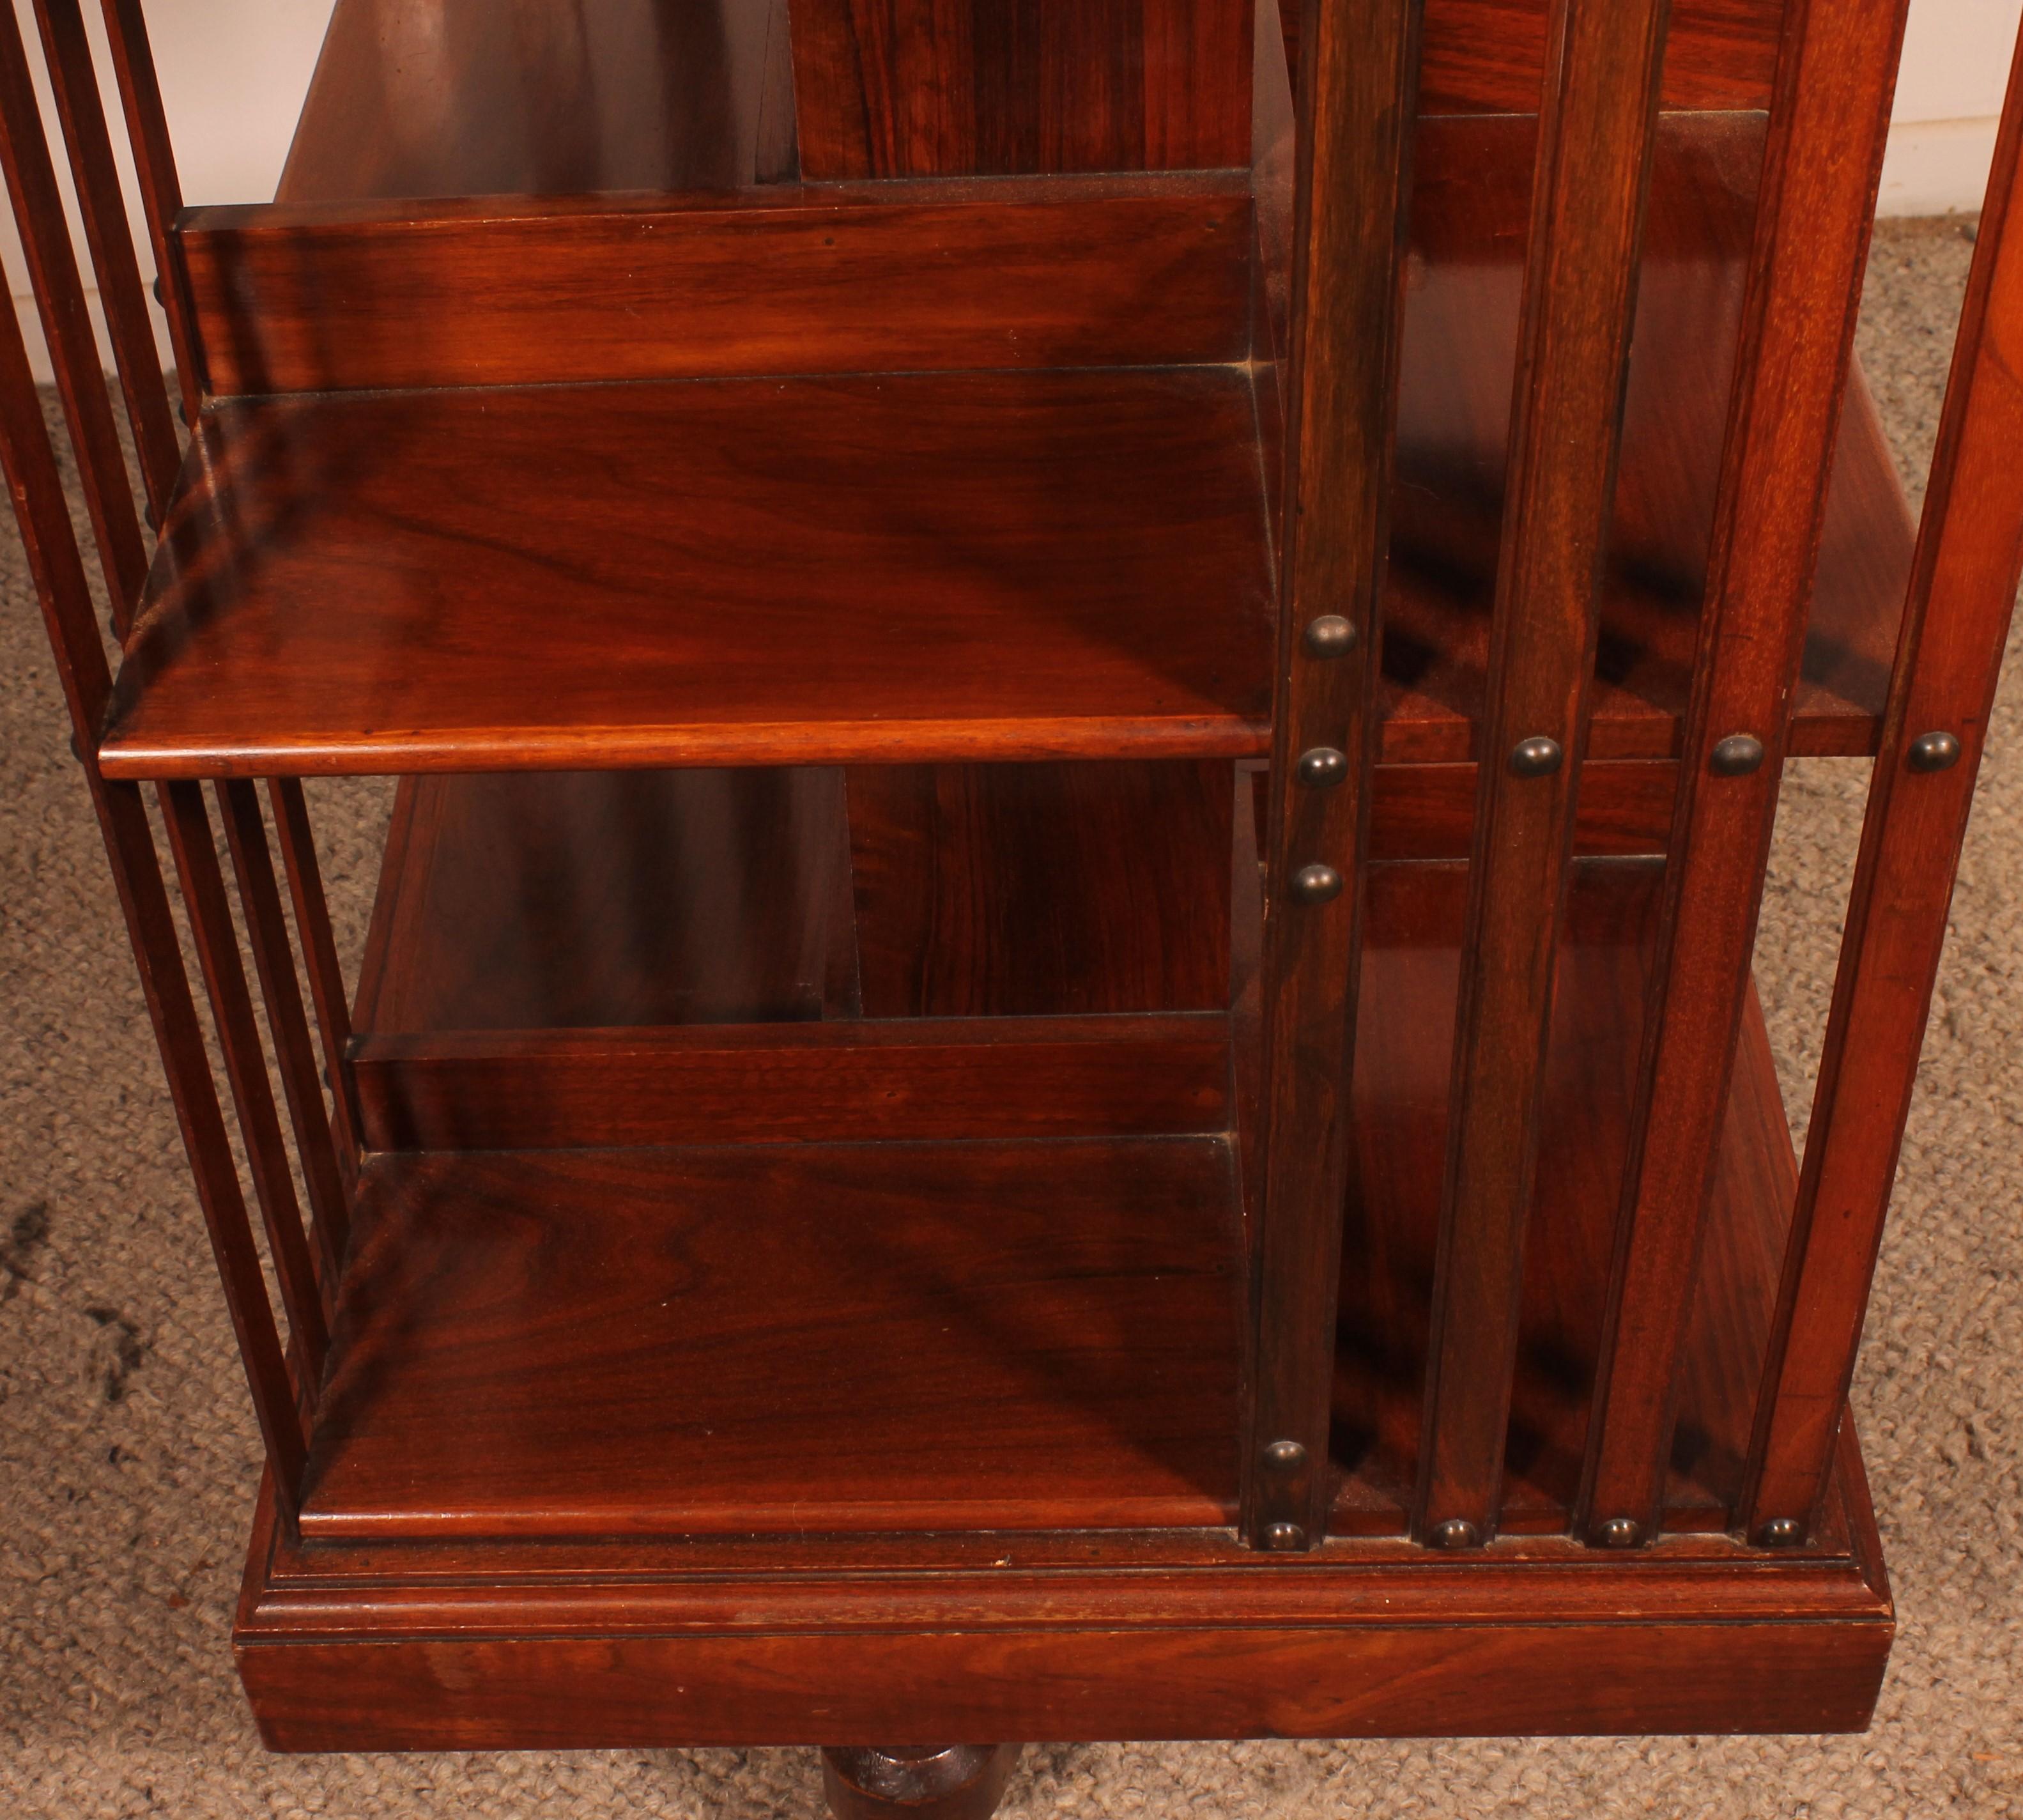 Elegant revolving bookcase in walnut from the end of the 19th century from England with iron base

Bookcases with iron base are the most sought after since they are of superior quality. Indeed, the iron base allows for better stability. In addition,